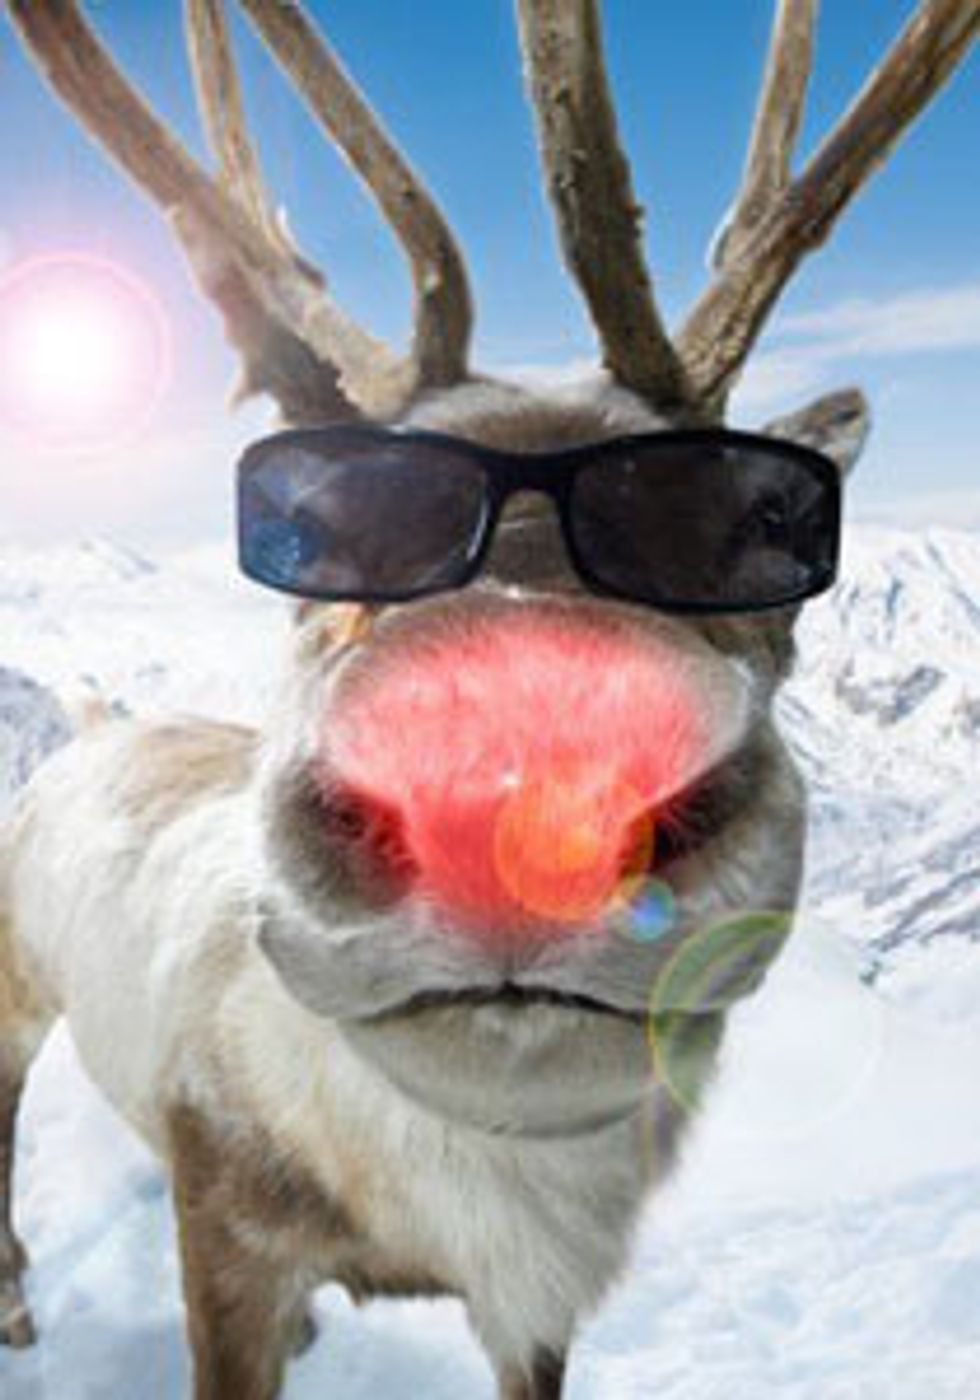 The Metaphysical Implications Of 'Rudolph The Red-Nosed Reindeer'